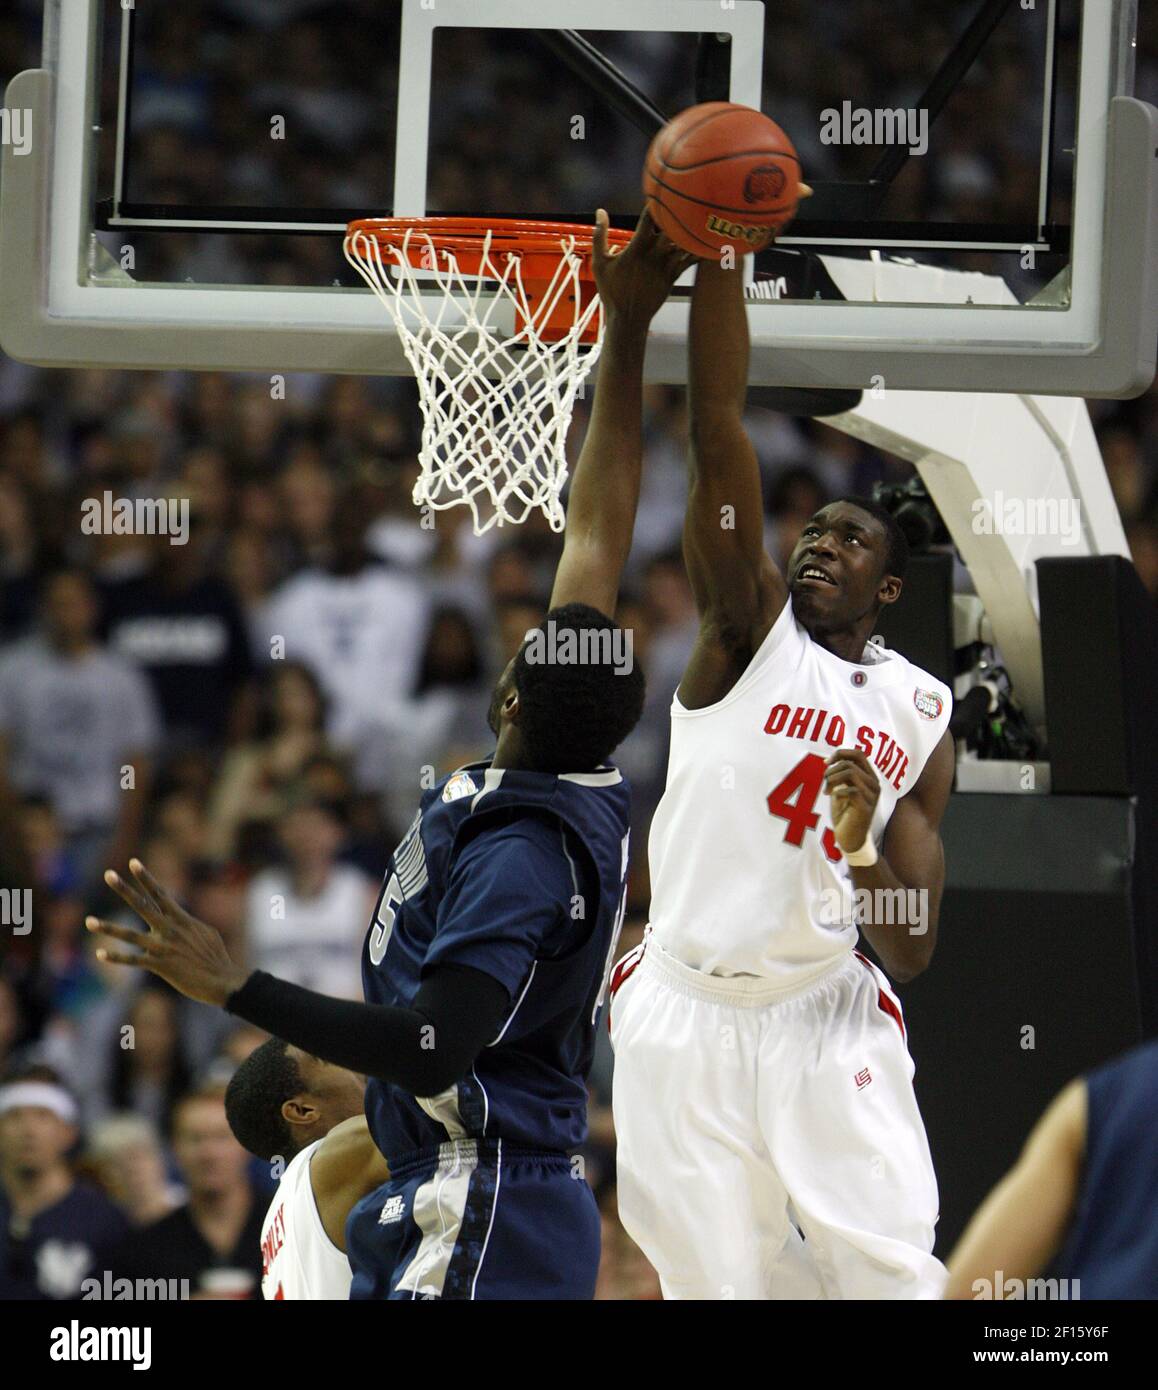 Ohio State's Othello Hunter blocks a shot by Georgetown's Roy Hibbert during their NCAA Final Four semifinal game in Atlanta, Georgia, on Saturday, March 31, 2007. (Photo by Jim Prisching/Chicago Tribune/MCT/Sipa USA) Stock Photo